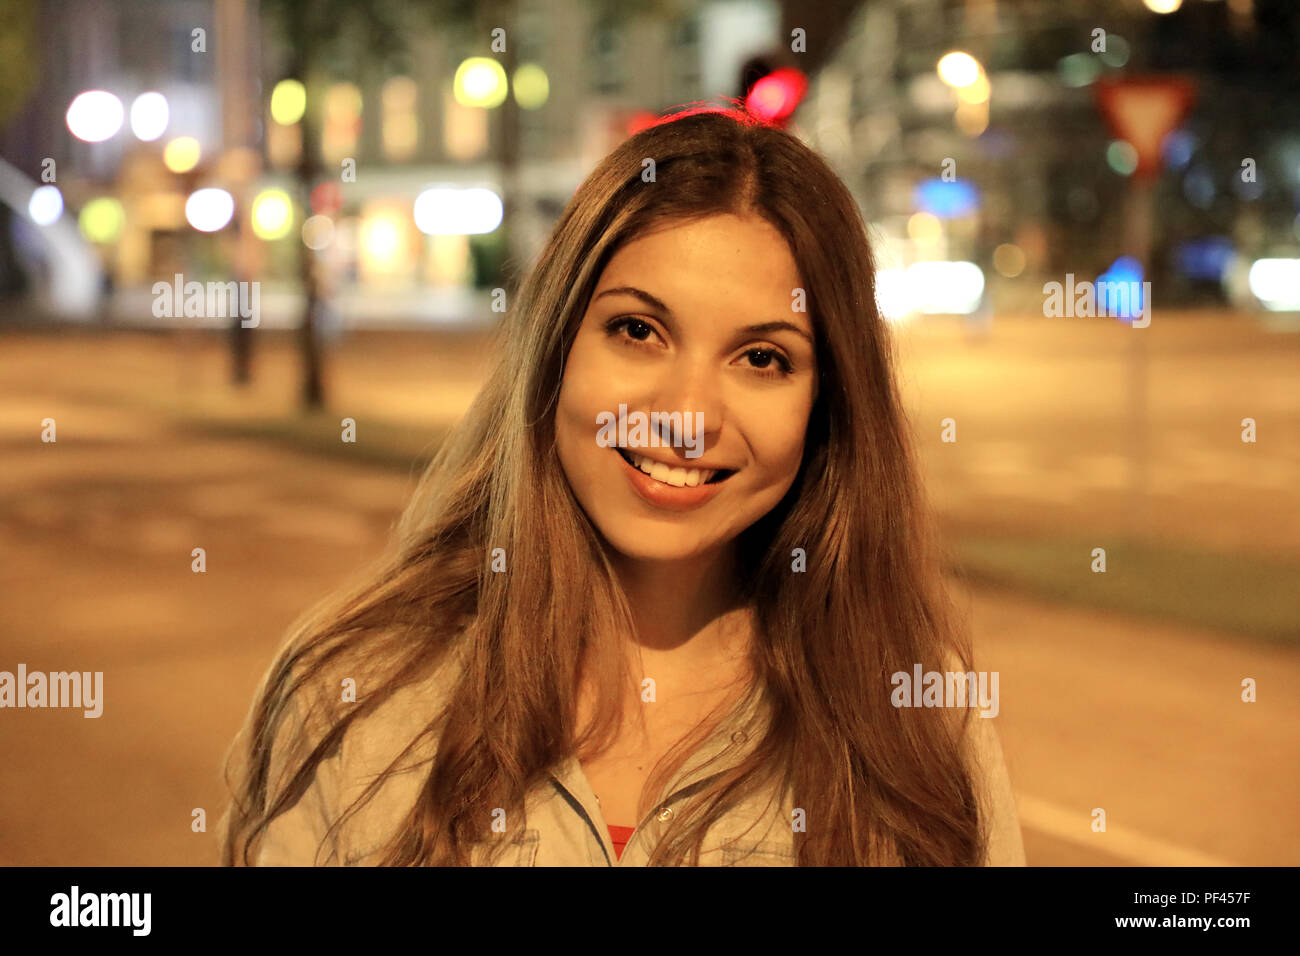 Portrait of young woman in the center of Eindhoven city at night, Netherlands, Europe Stock Photo